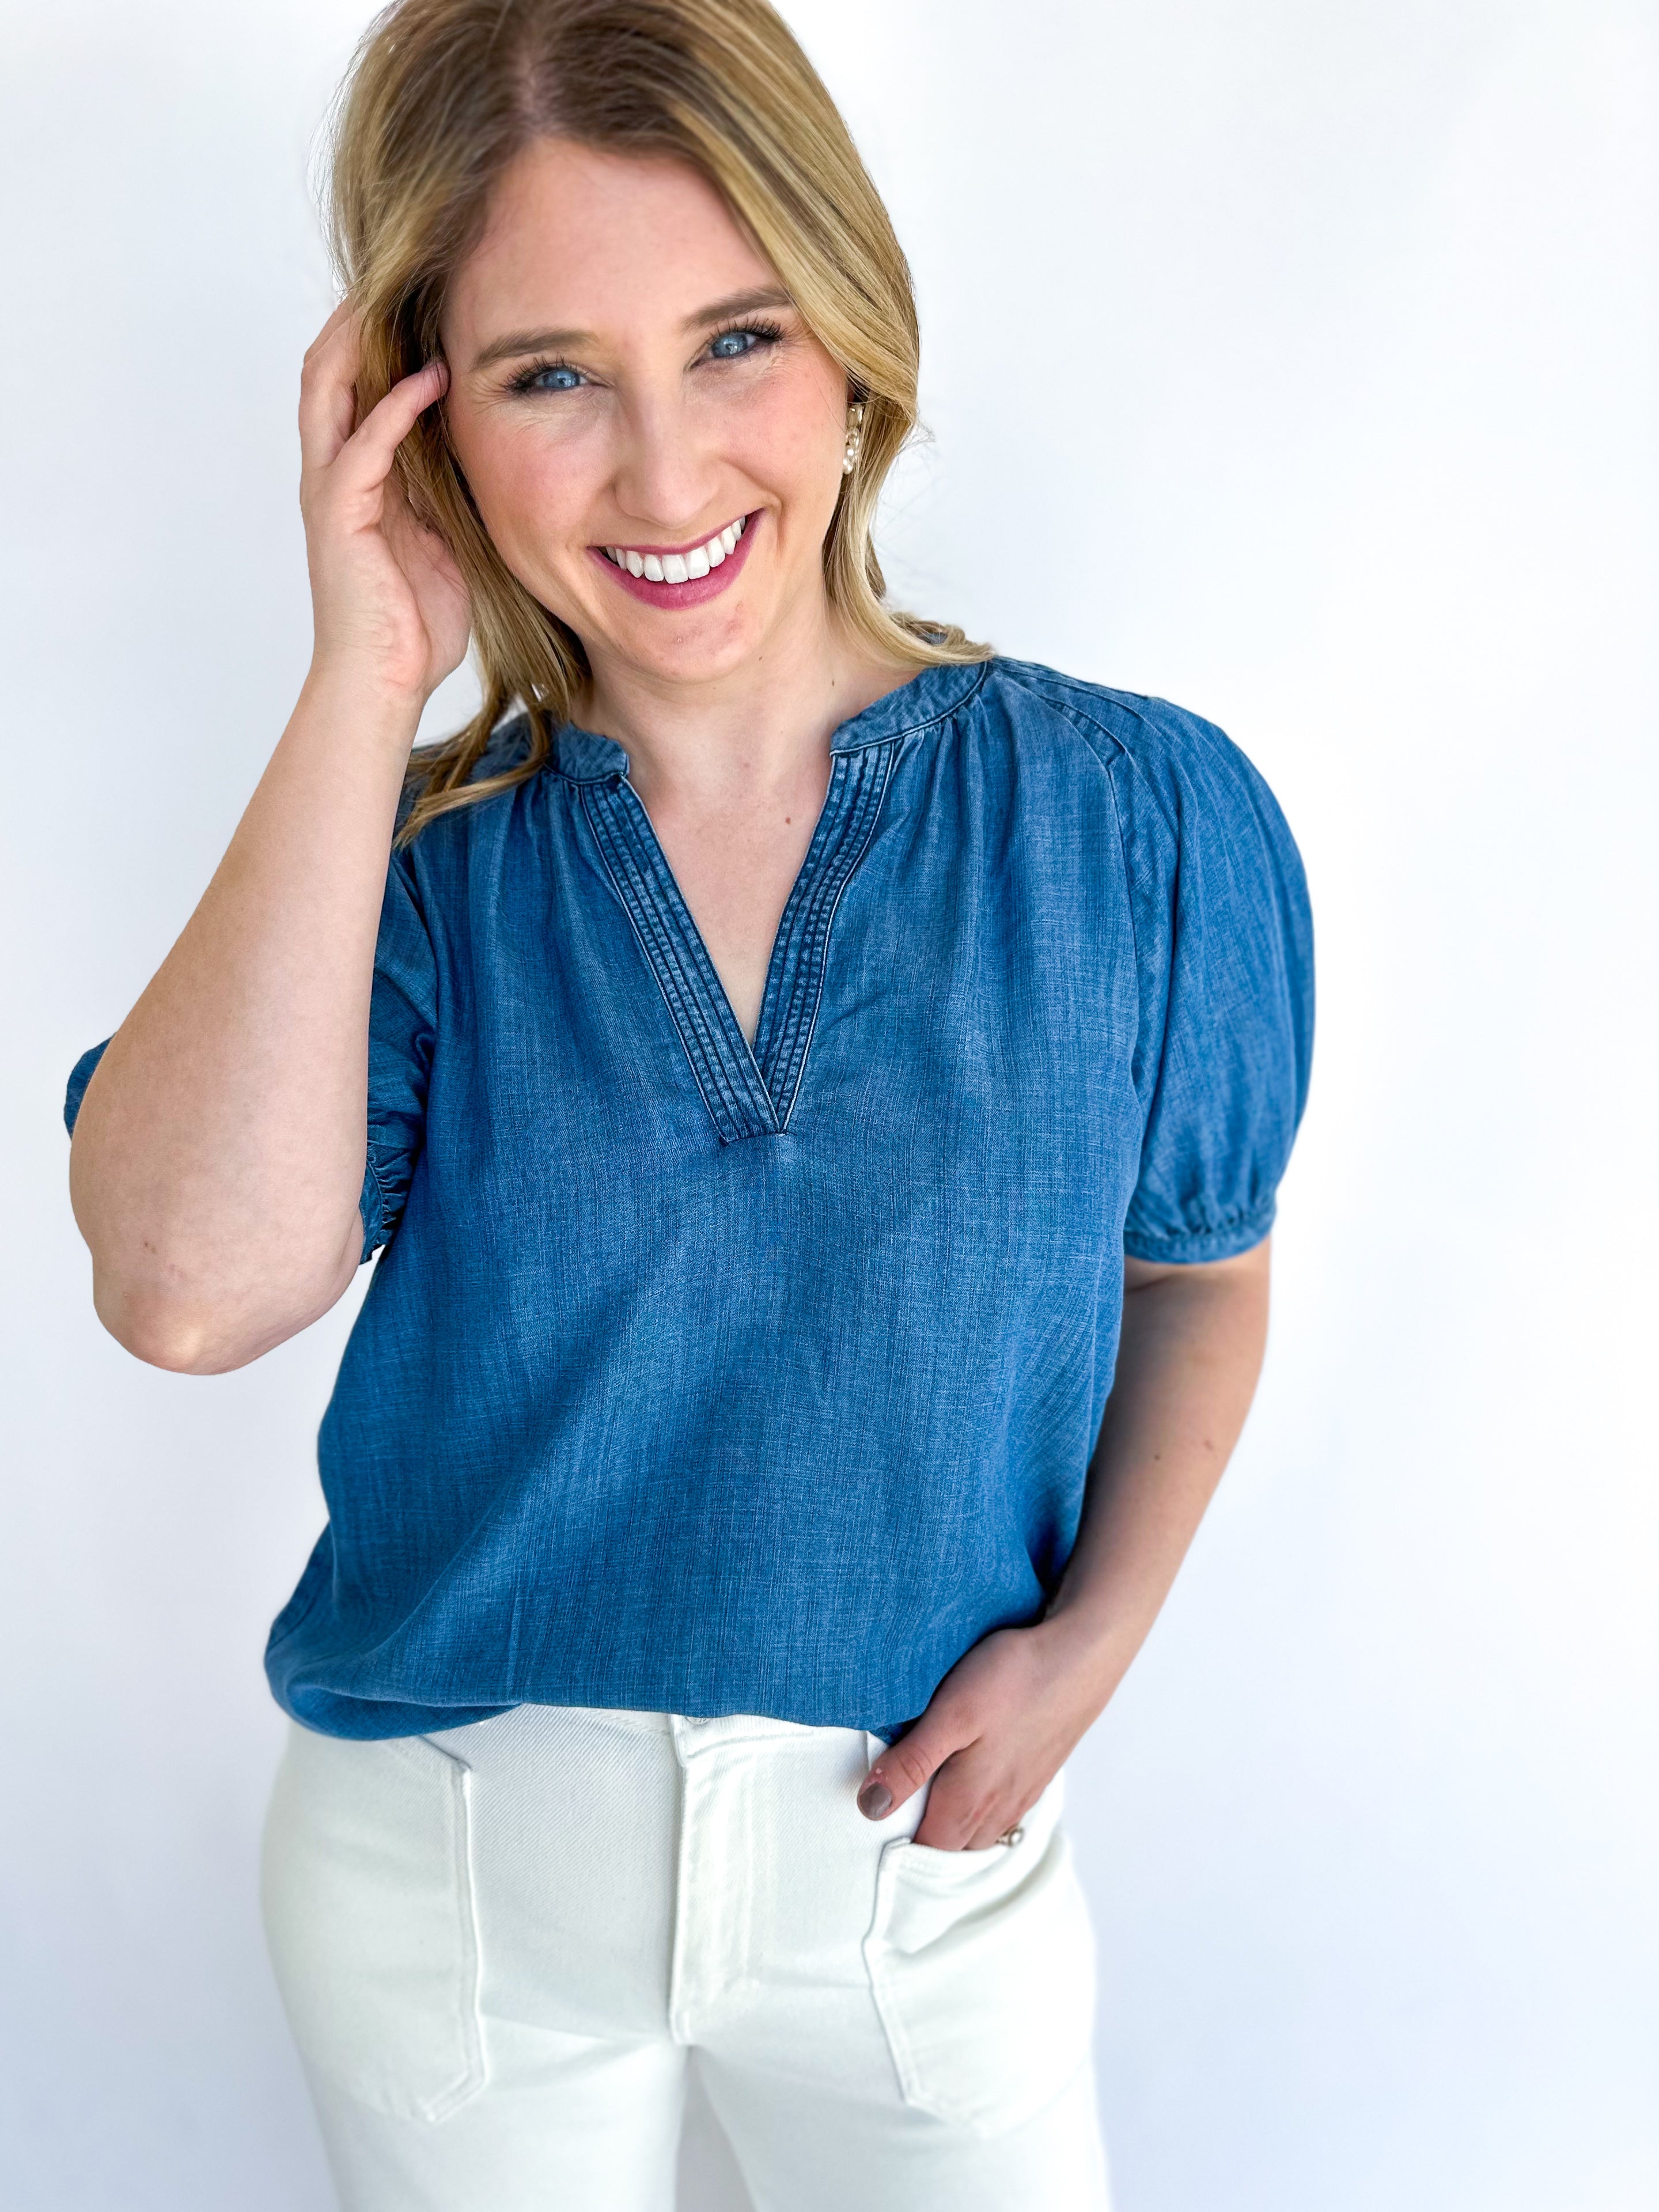 Classy Chambray Blouse-200 Fashion Blouses-CURRENT AIR CLOTHING-July & June Women's Fashion Boutique Located in San Antonio, Texas